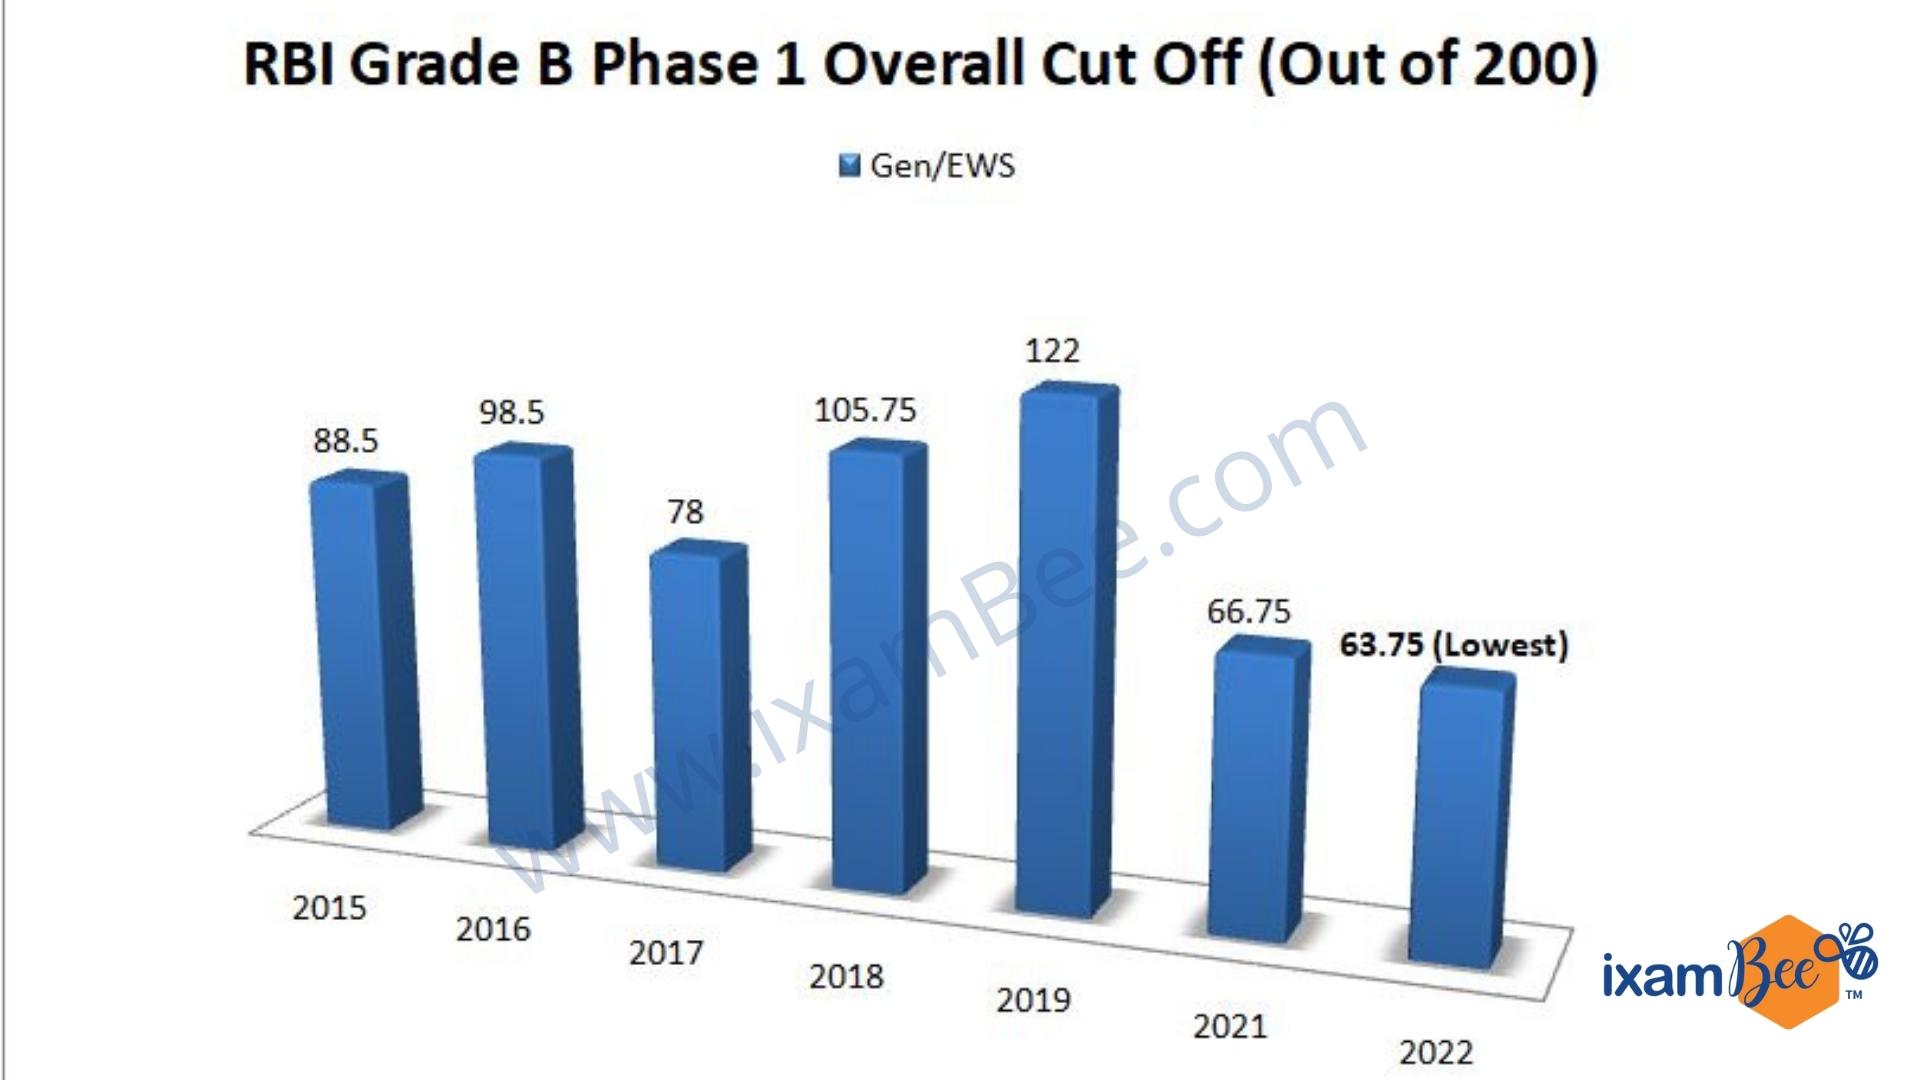 RBI Grade B Phase 1 Past Seven Years Cut Off Analysis (2015-2022)